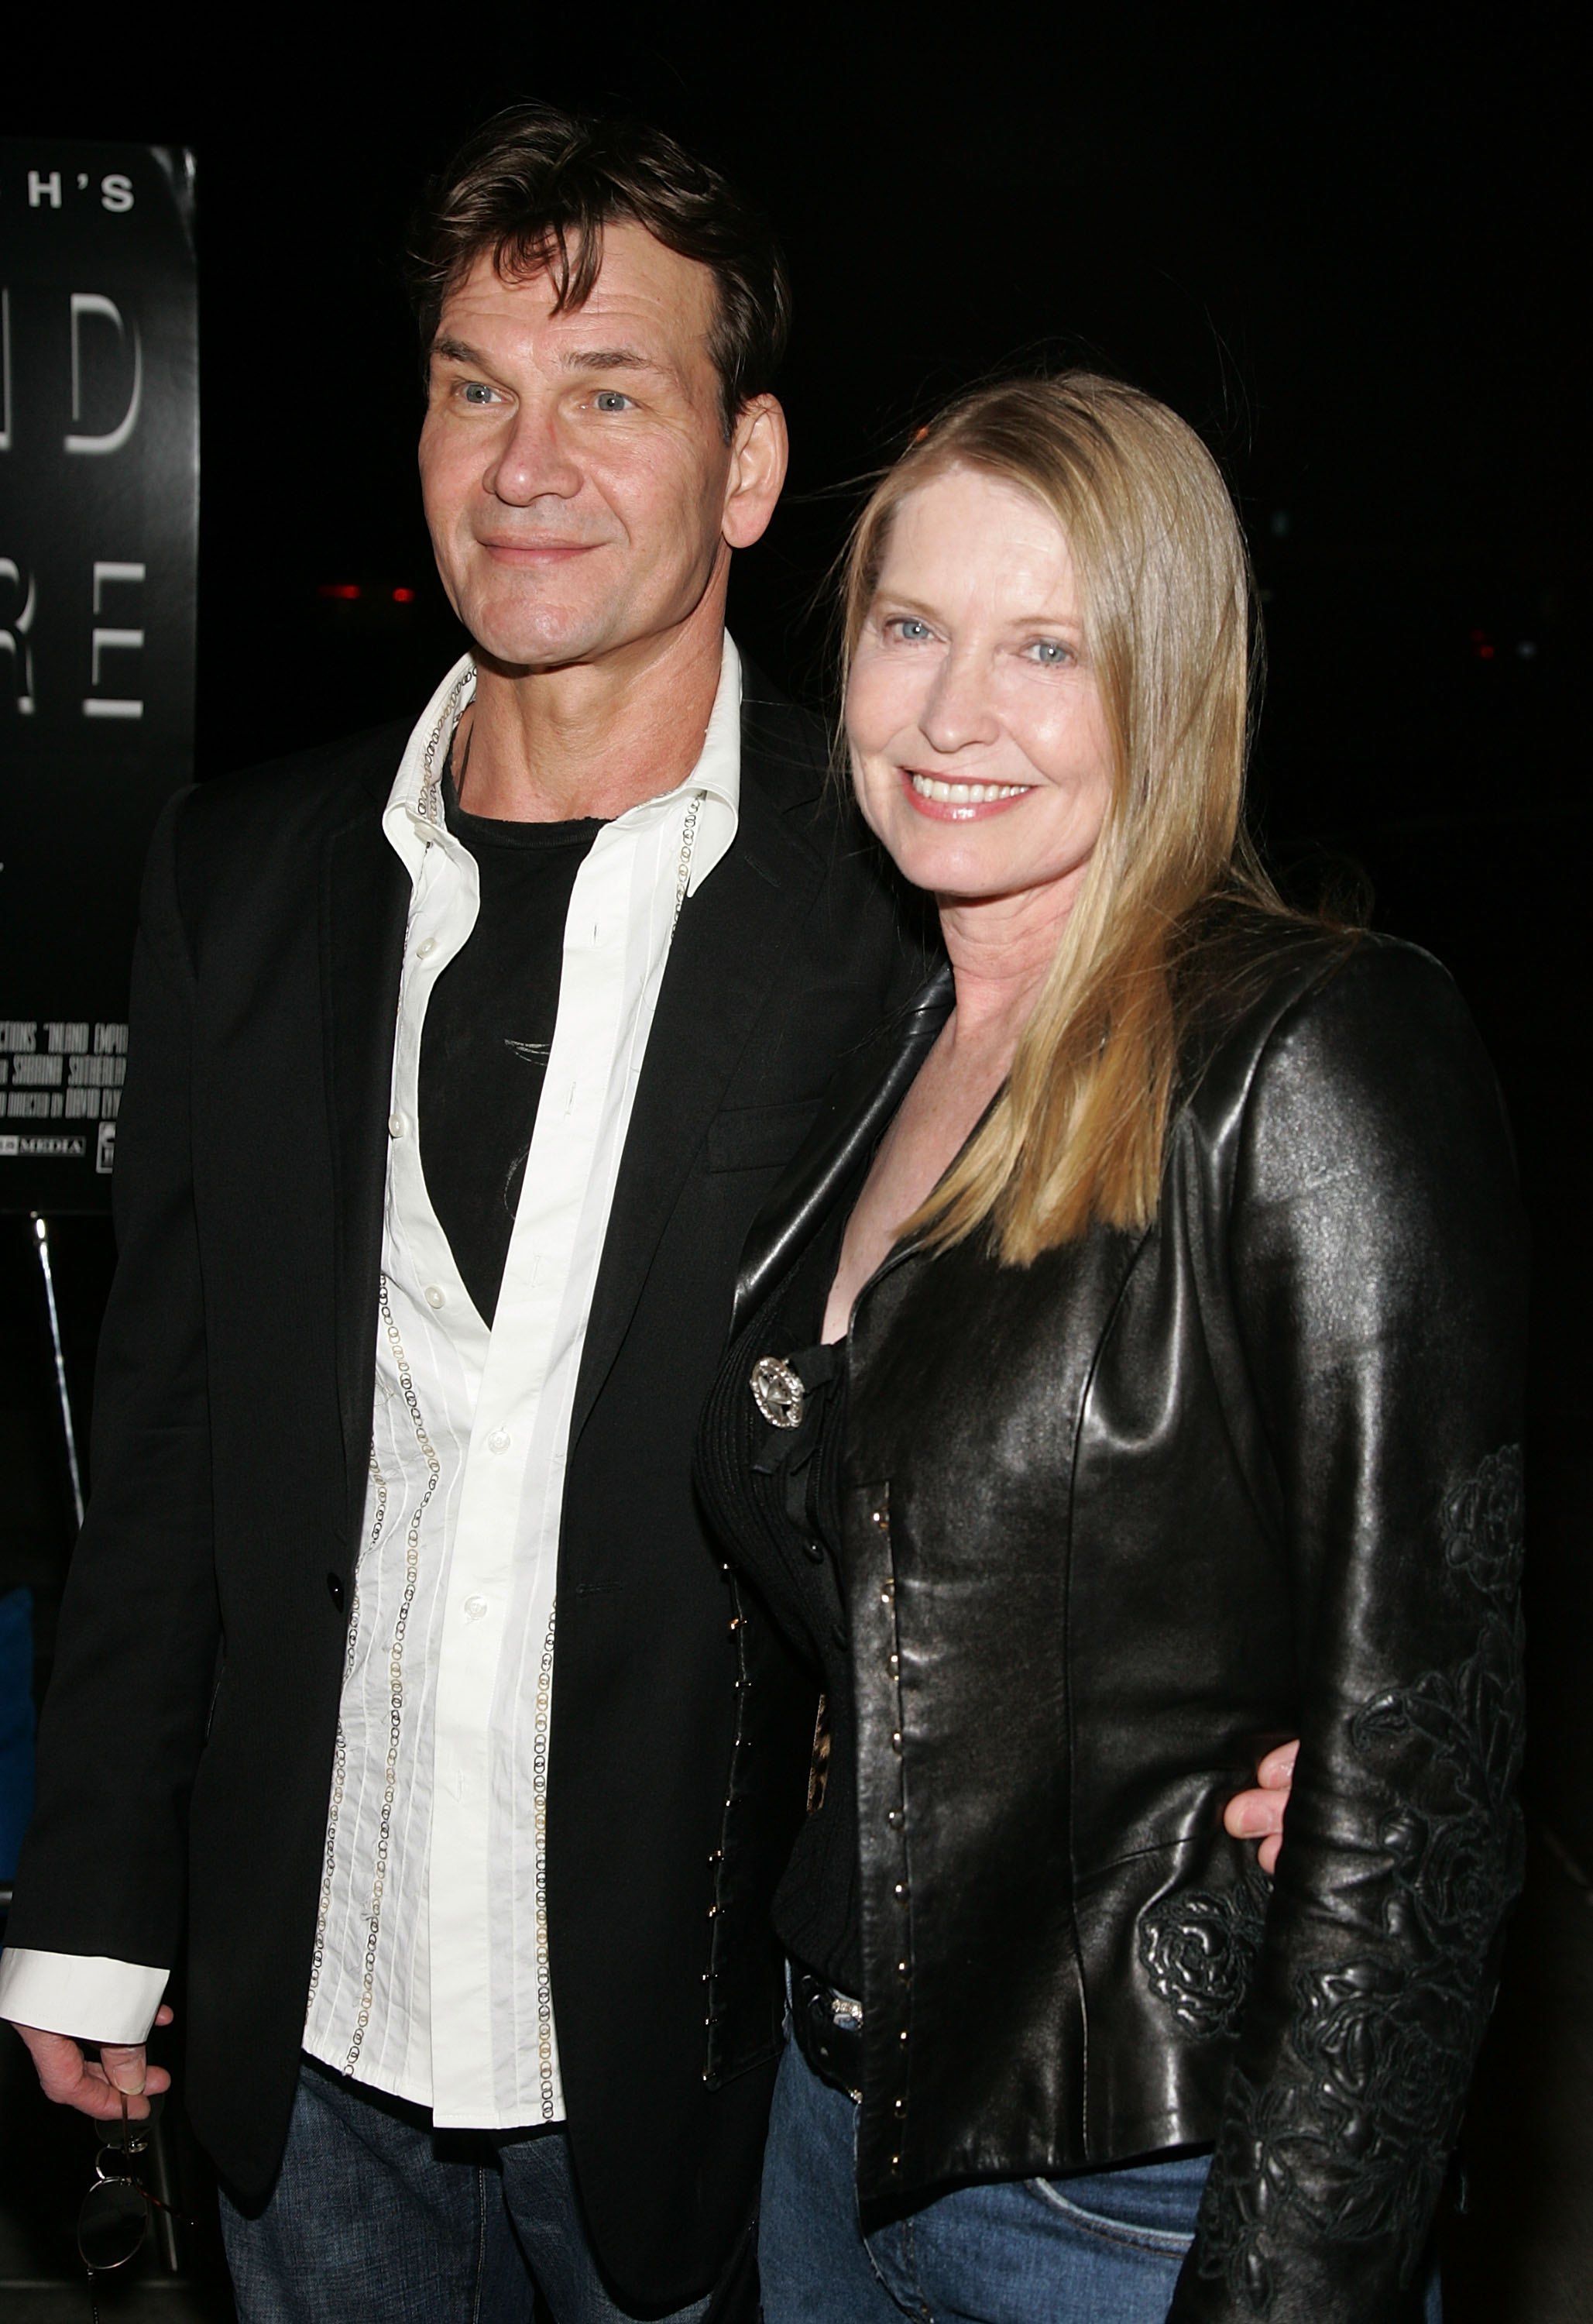 Patrick Swayze and his wife Lisa Niemi at the Los Angeles premiere of "Inland Empire" held at the LACMA Museum on December 9, 2006, in Los Angeles, California | Photo: Frazer Harrison/Getty Images